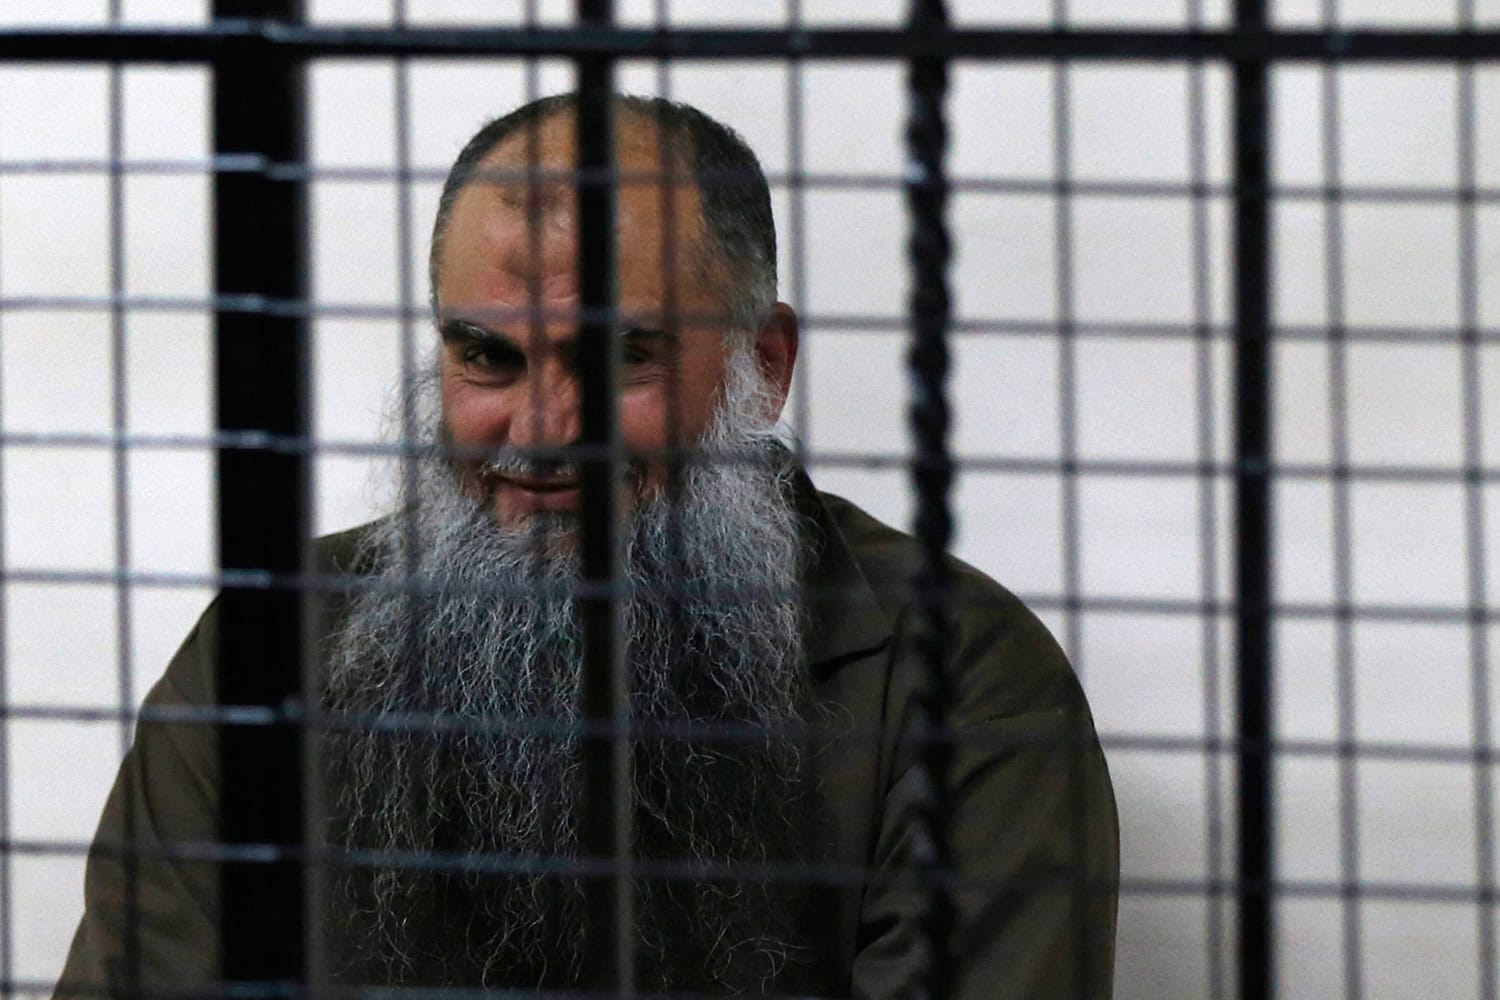 Islamist extremists force non-Muslim prisoners to pay a ‘protection tax’